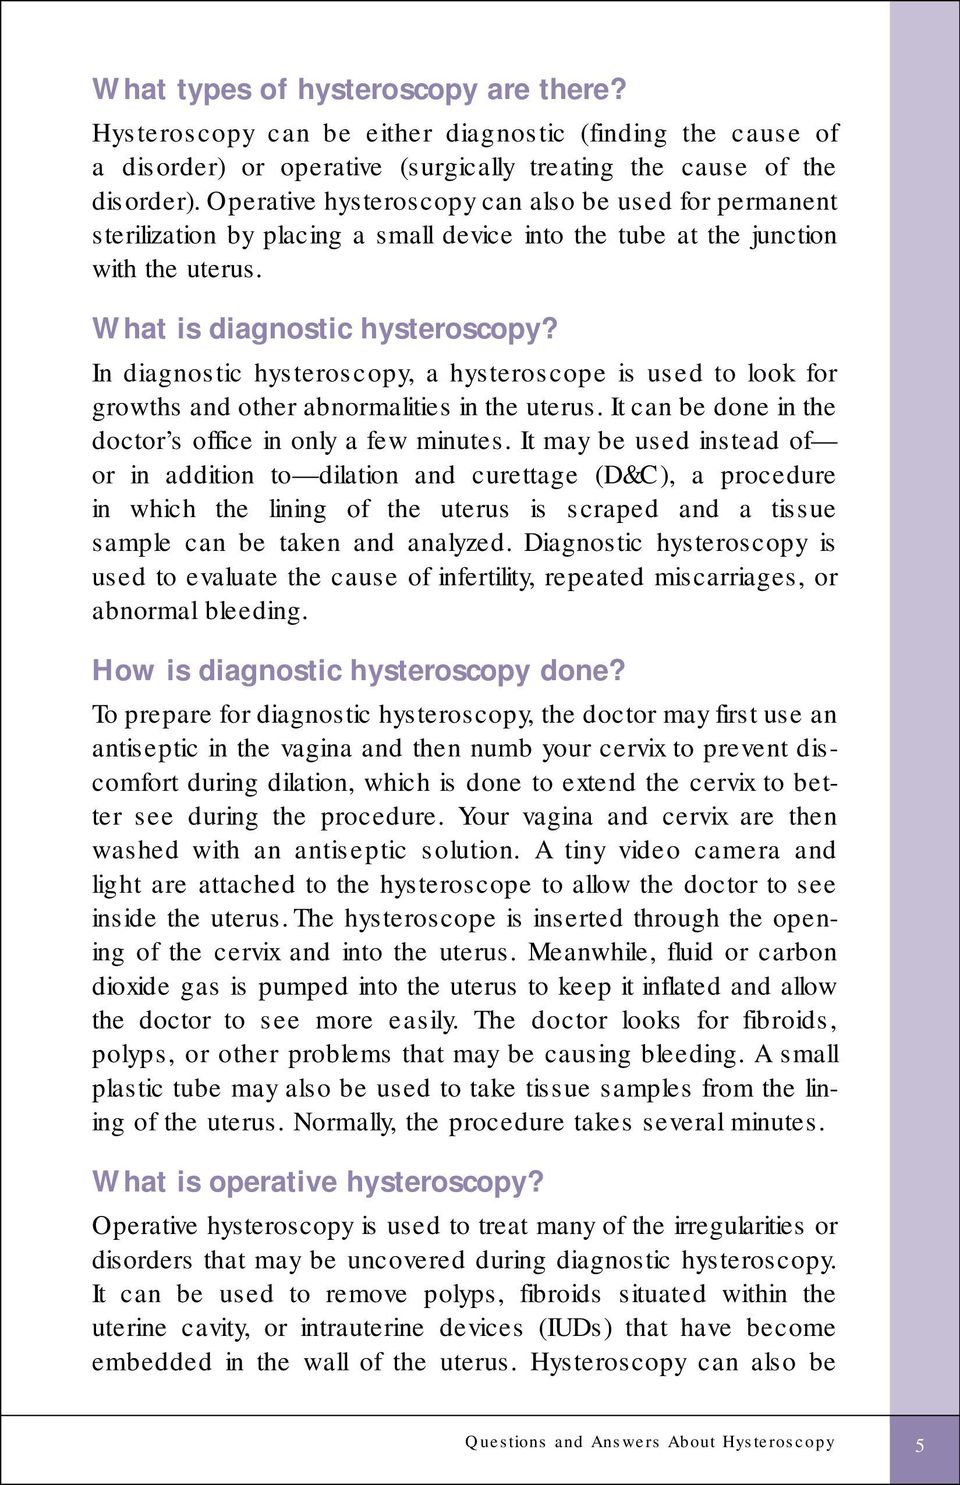 In diagnostic hysteroscopy, a hysteroscope is used to look for growths and other abnormalities in the uterus. It can be done in the doctor s office in only a few minutes.